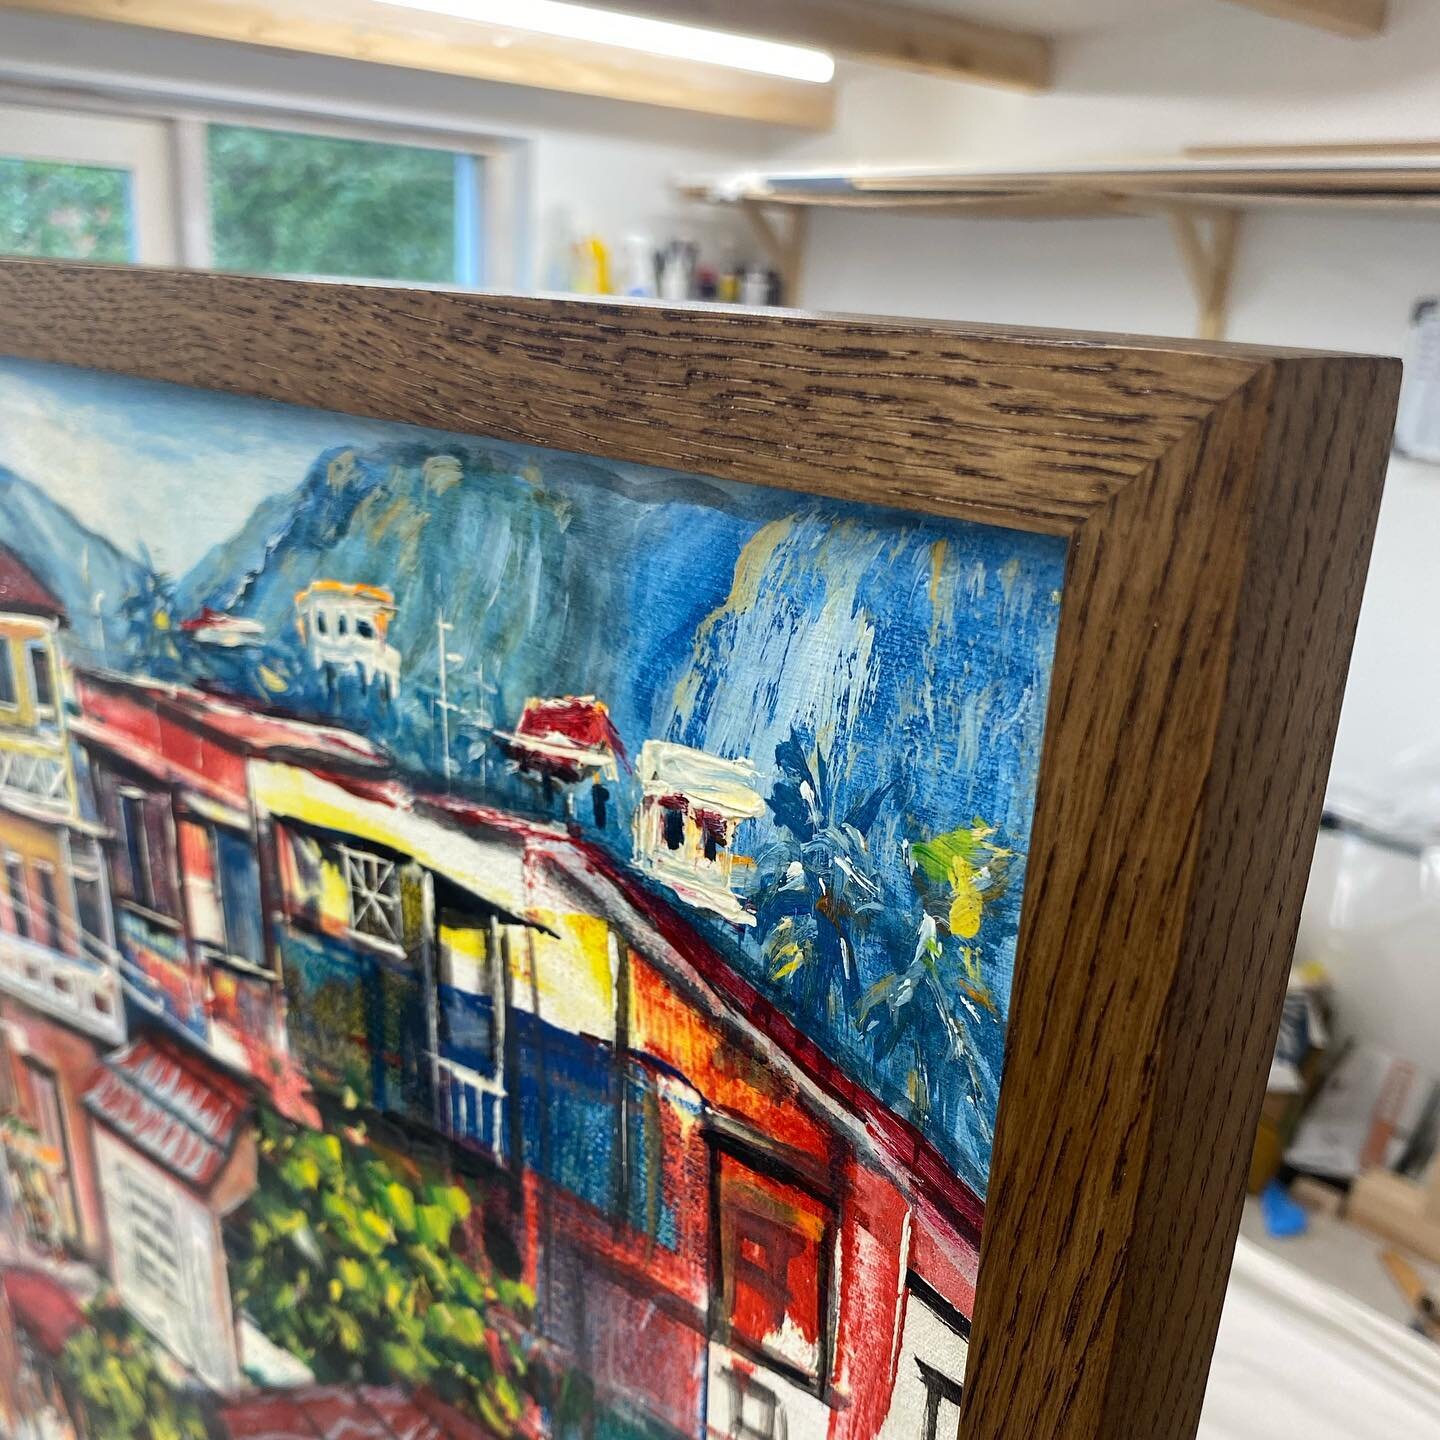 Holiday canvas! Re stretched round a new stretcher then finished with a mid-oak stained frame. 

#exeterart #inexeter #pictureframing #pictureframes #devonart #devonartistnetwork #smallbusiness #smallbusinessuk #canvaspainting #canvasstretching #oak 